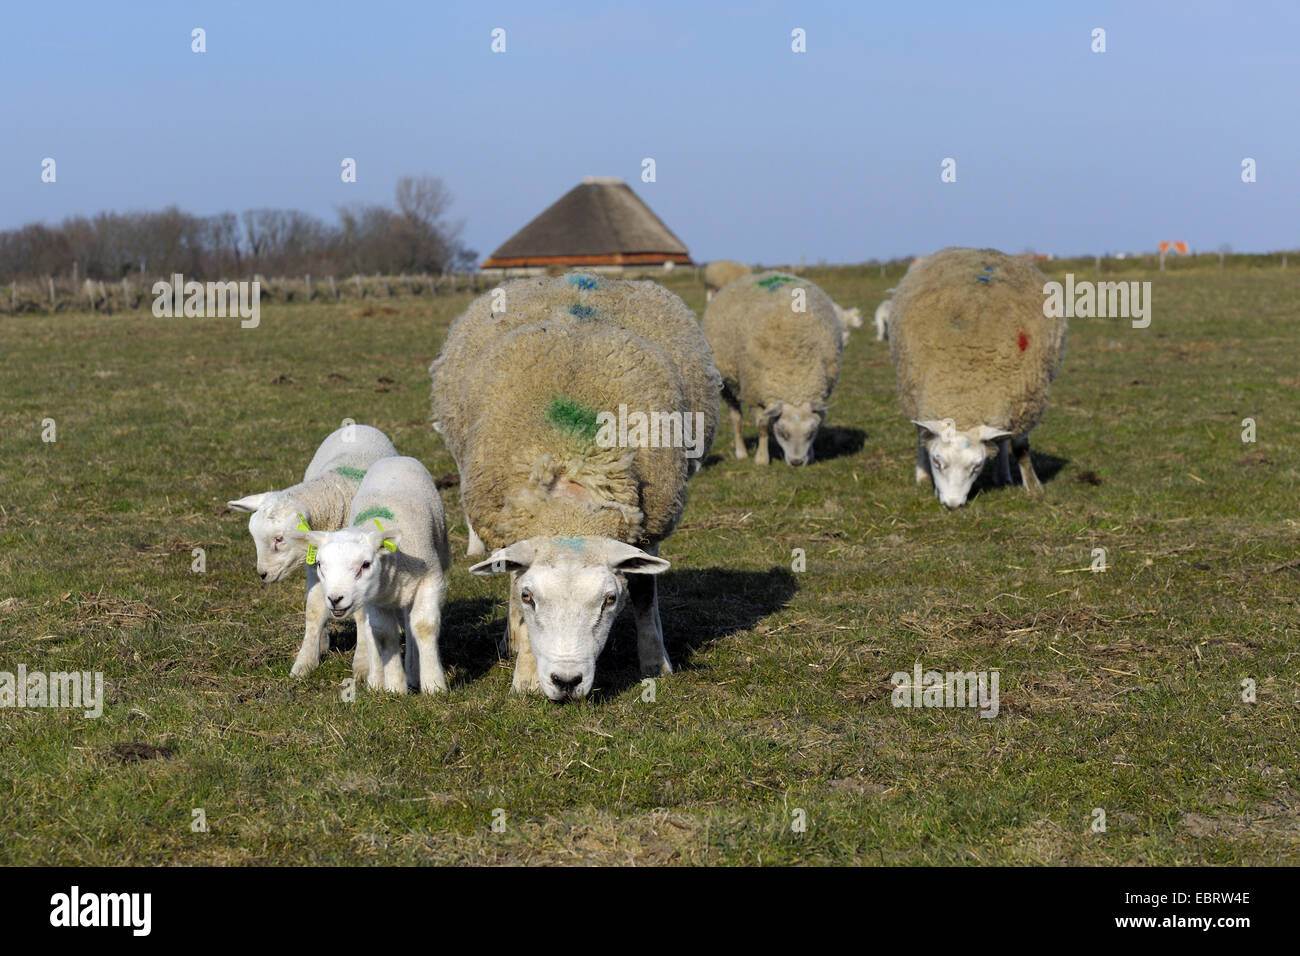 Texel sheep (Ovis ammon f. aries), sheep and lambkins in a pasture, Netherlands, Texel Stock Photo